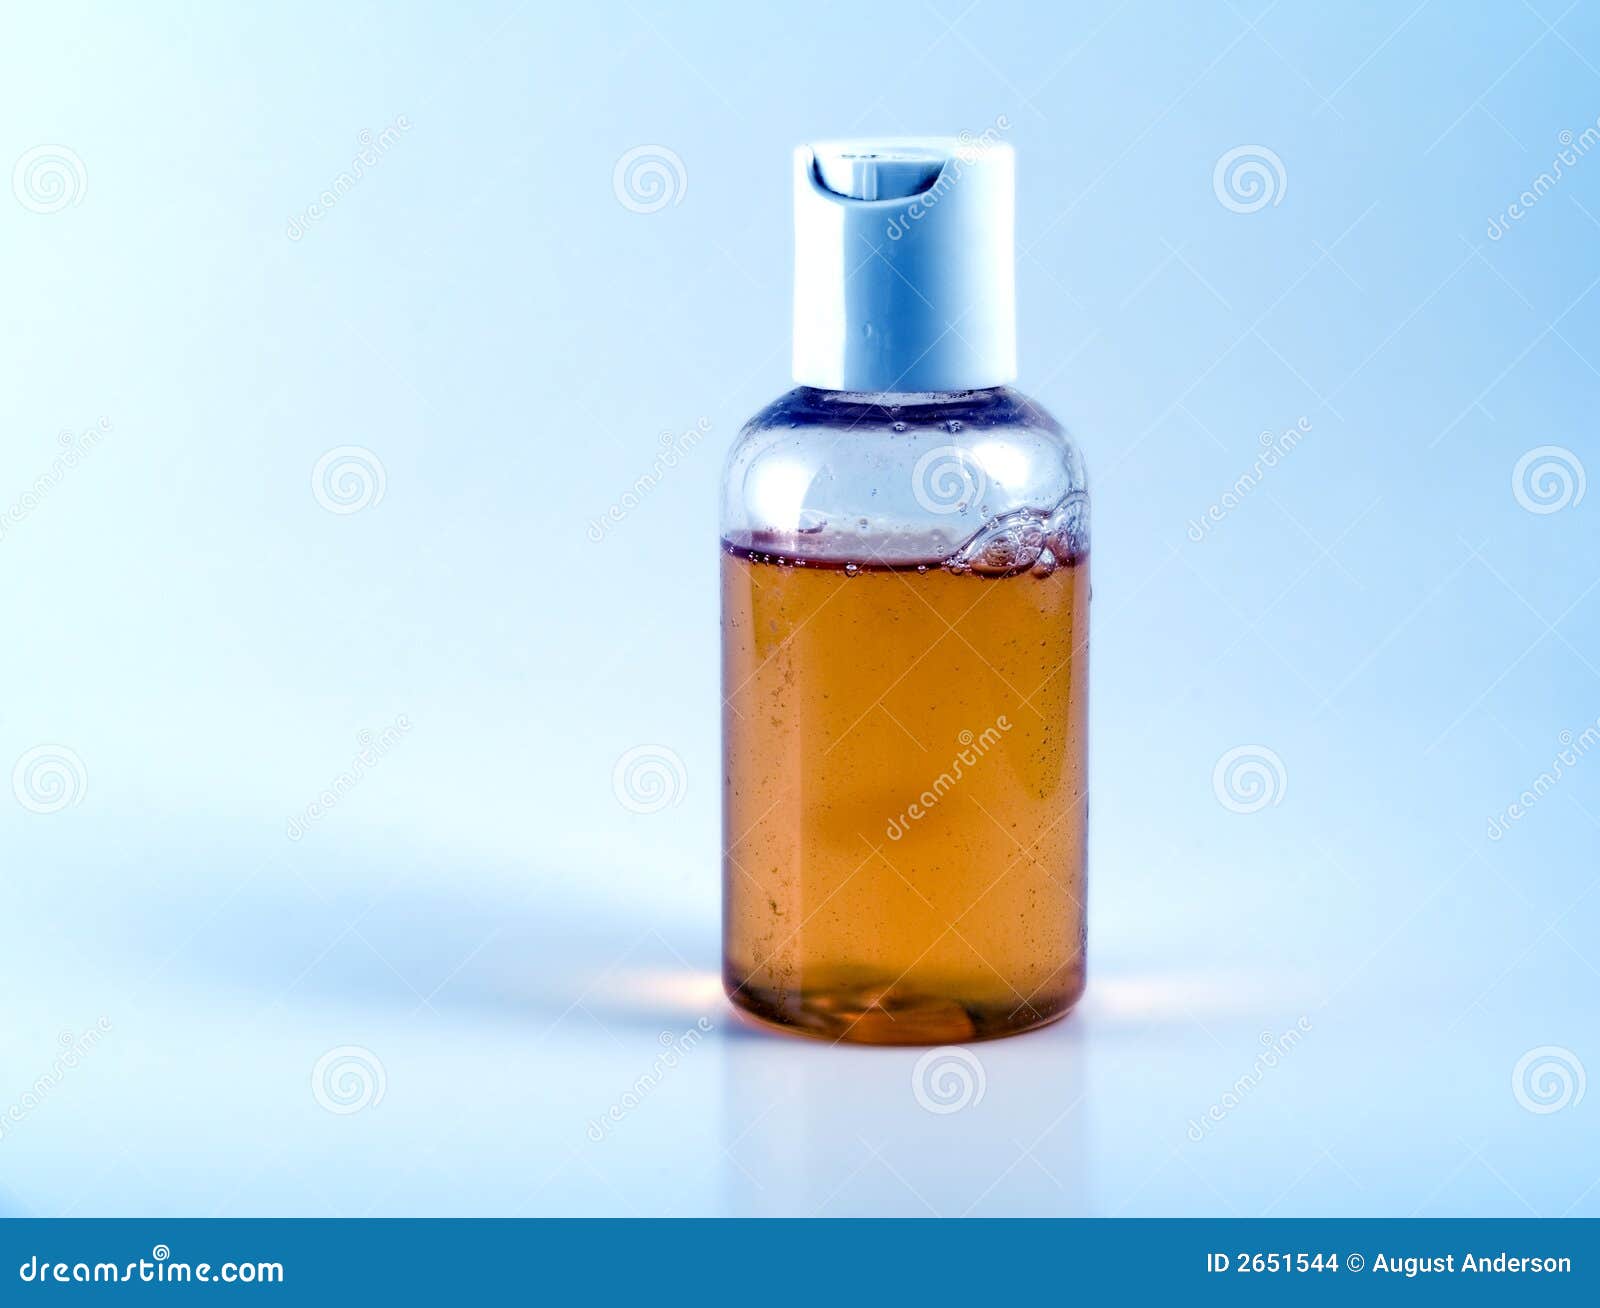 Download Clear Bottle With Amber Liquid Stock Photo Image Of Liquid Soap 2651544 Yellowimages Mockups